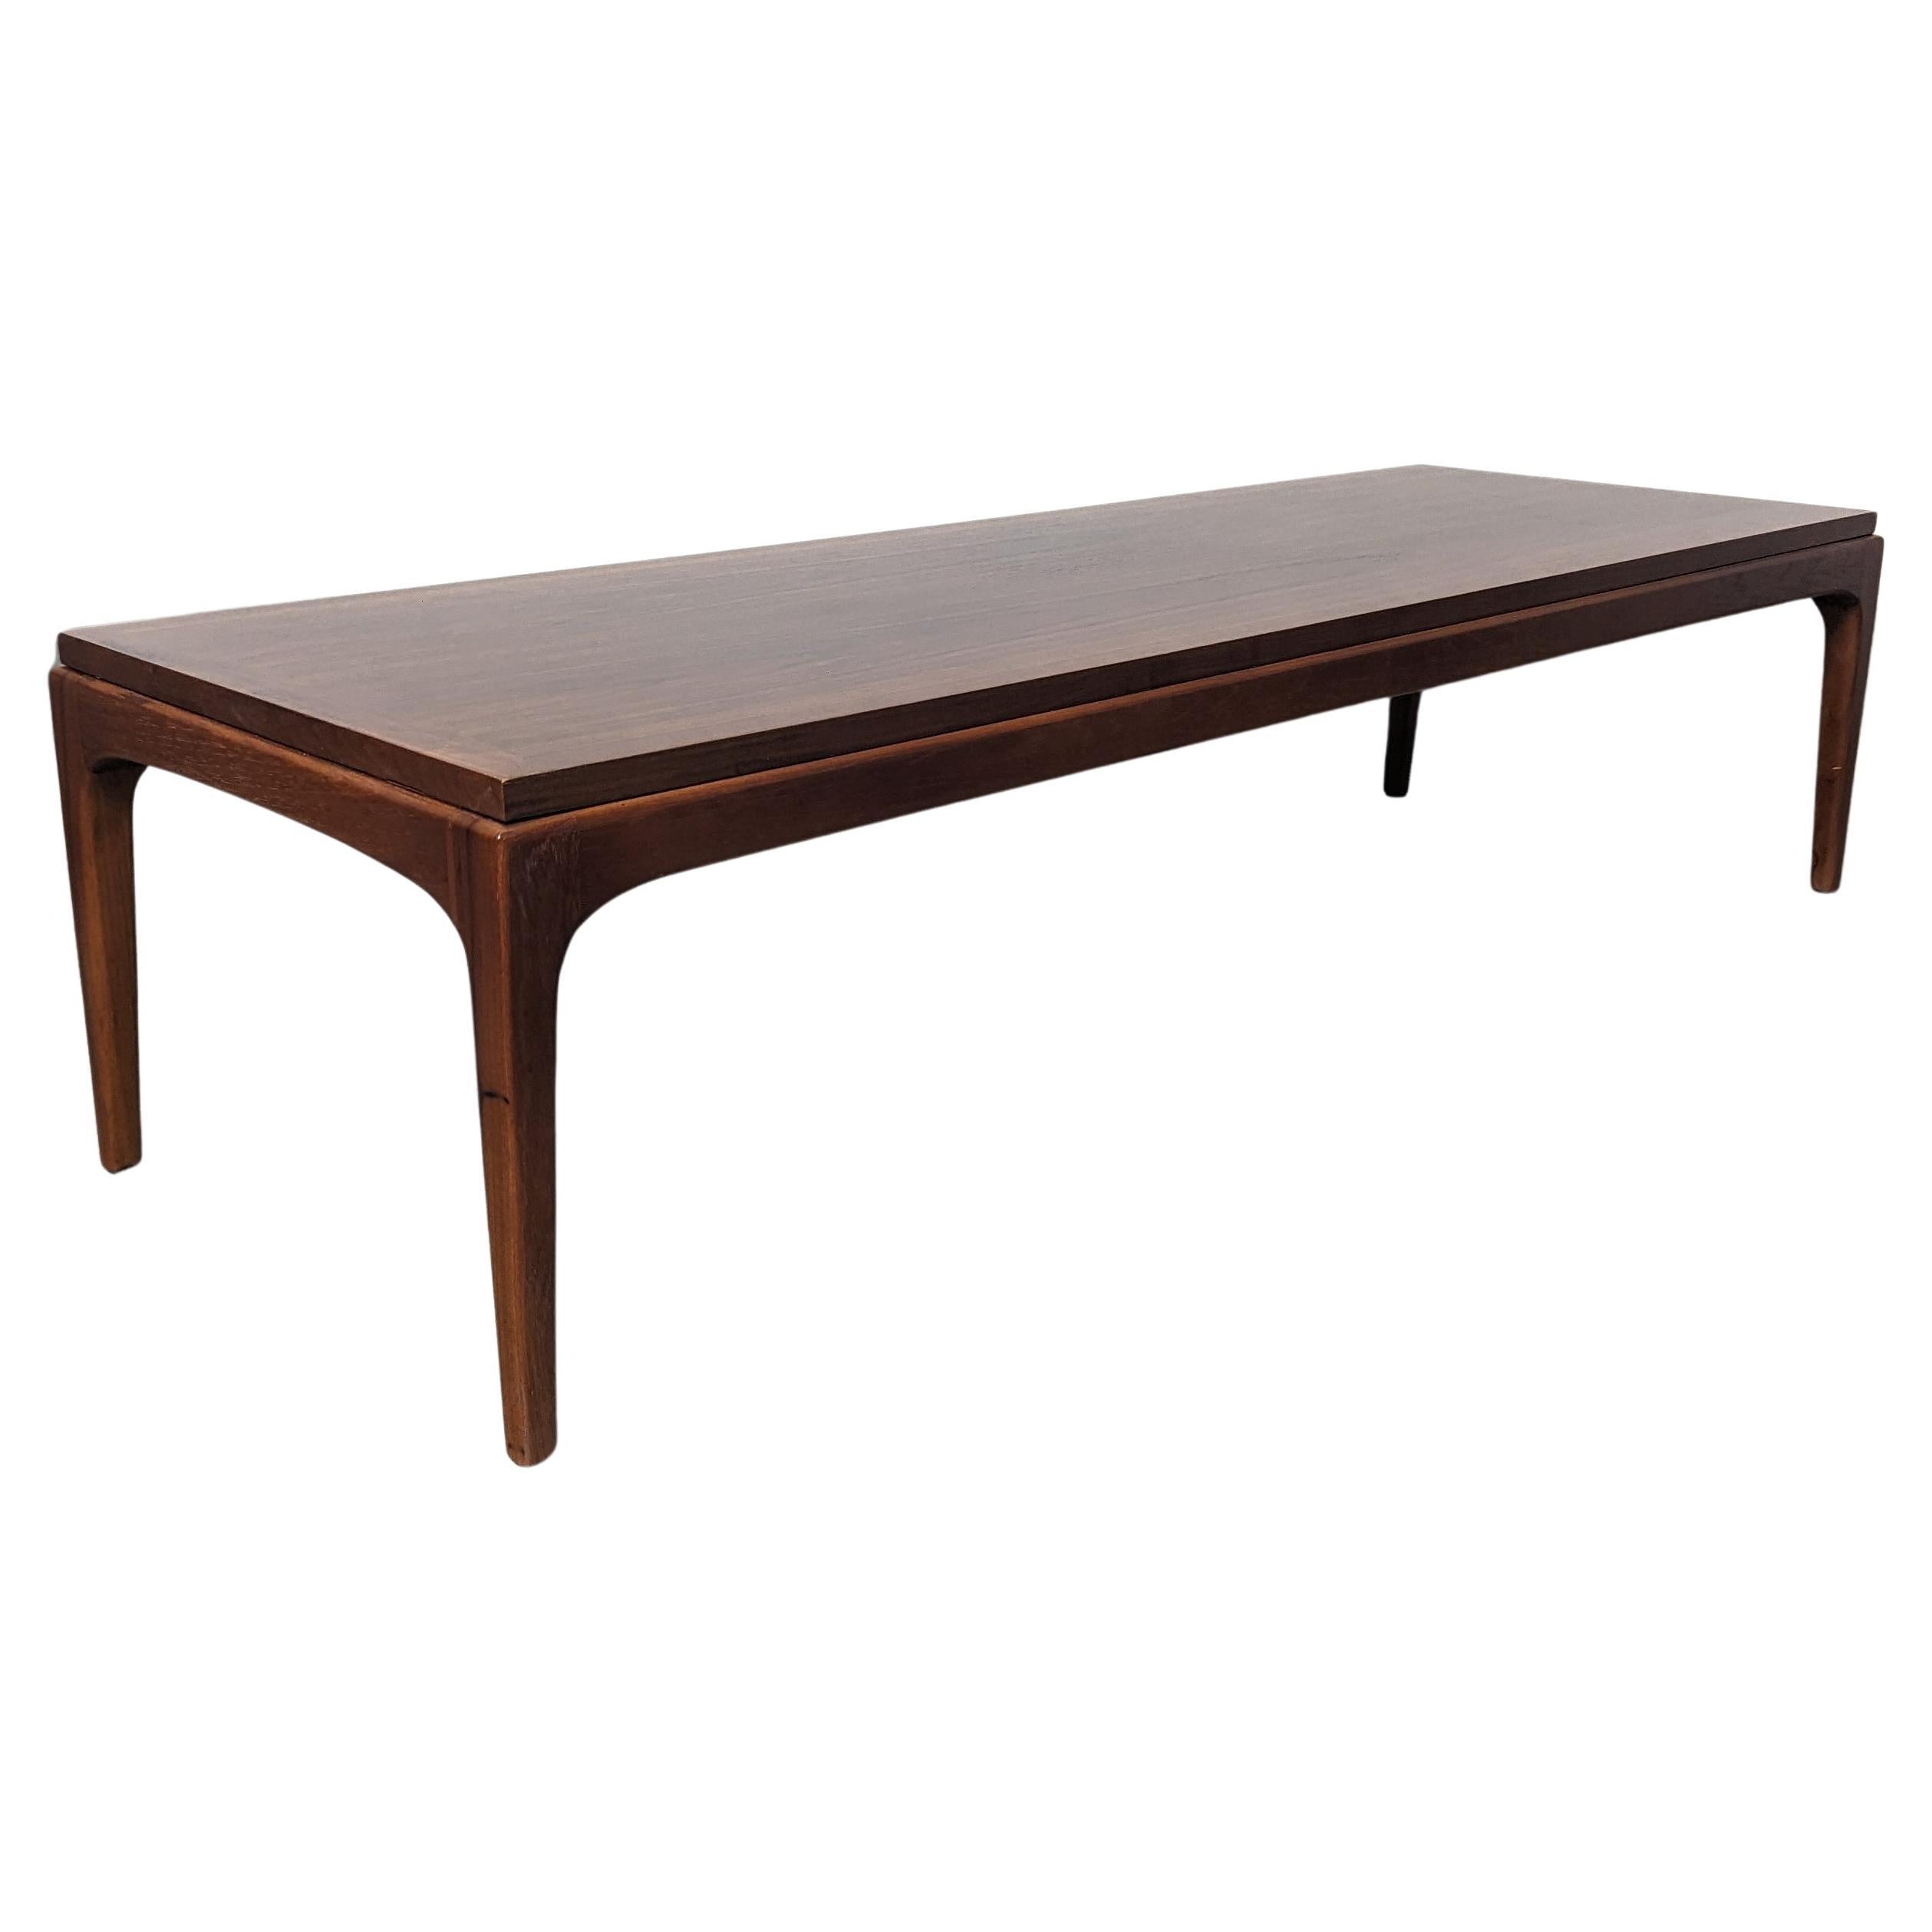 Step back in time with this beautifully restored Mid Century Modern coffee table, crafted by the renowned furniture manufacturer, Lane, during the iconic 1960s era. This piece is a true gem for those who appreciate the simplicity of vintage